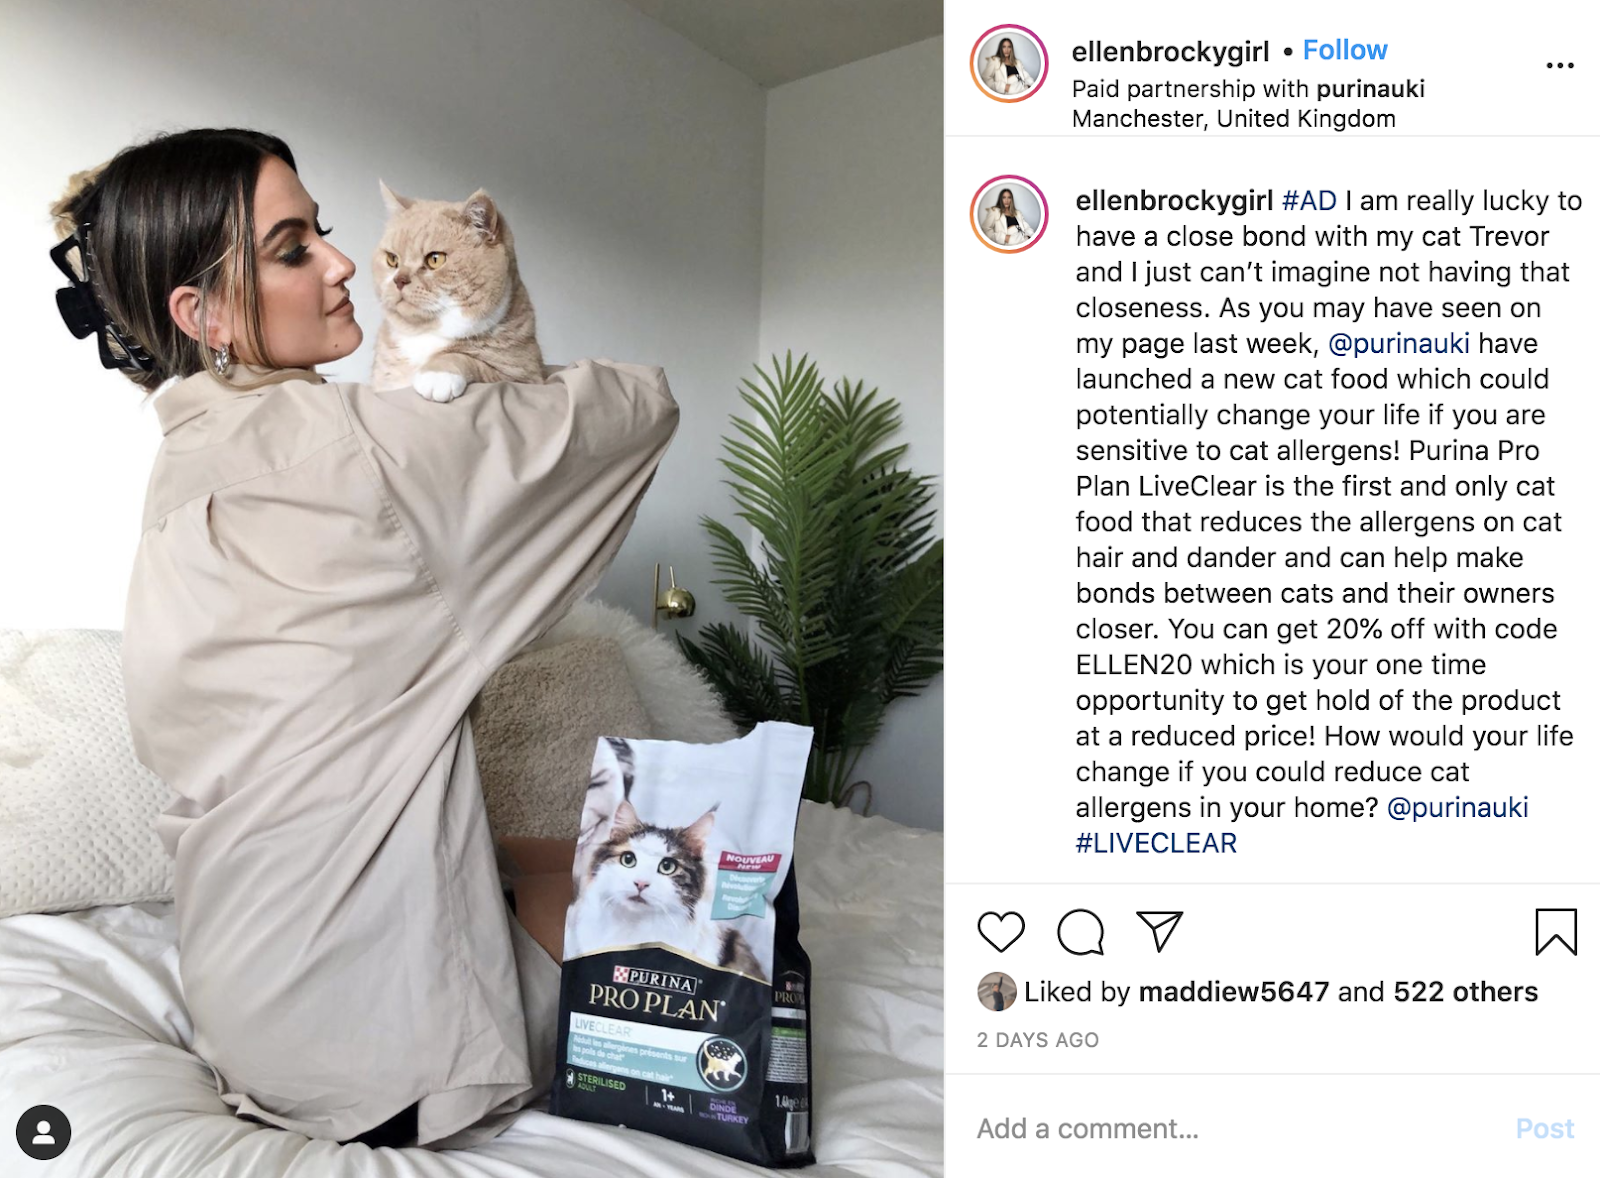 An example of influencer marketing on Instagram